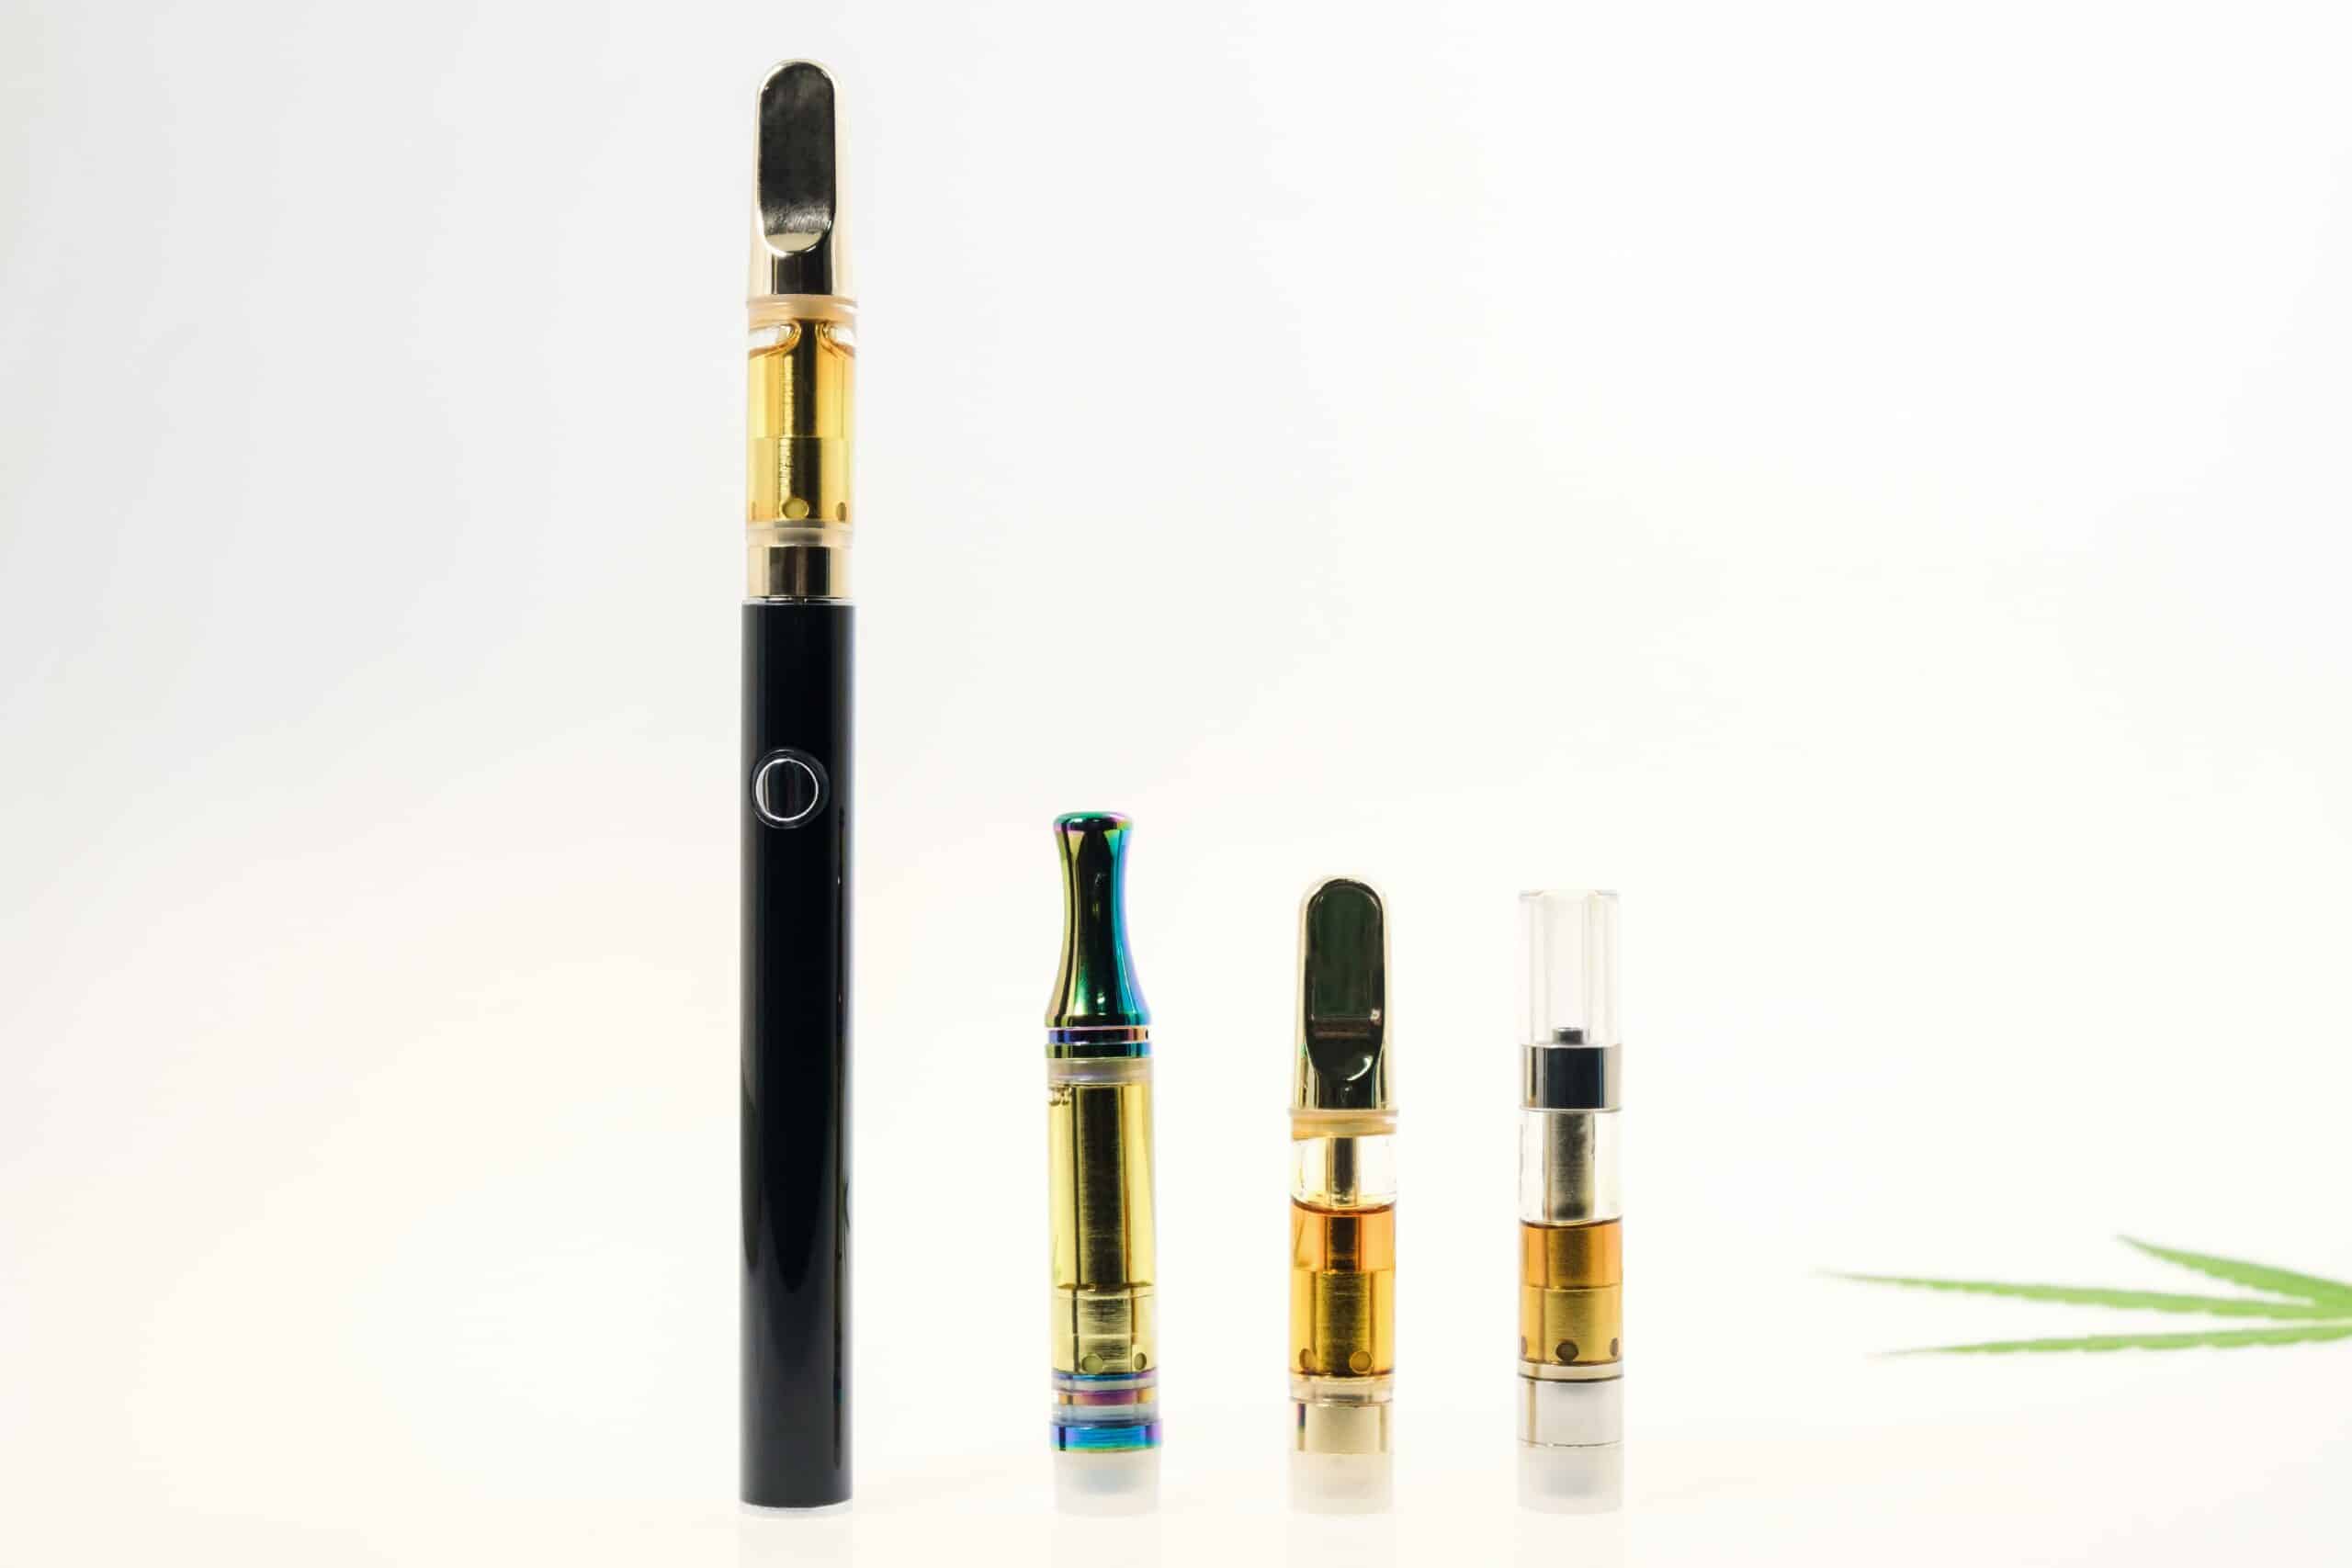 Delta 8 Vape Cartridges: A Comparison of Their Pharmacokinetics with Other Cannabinoids